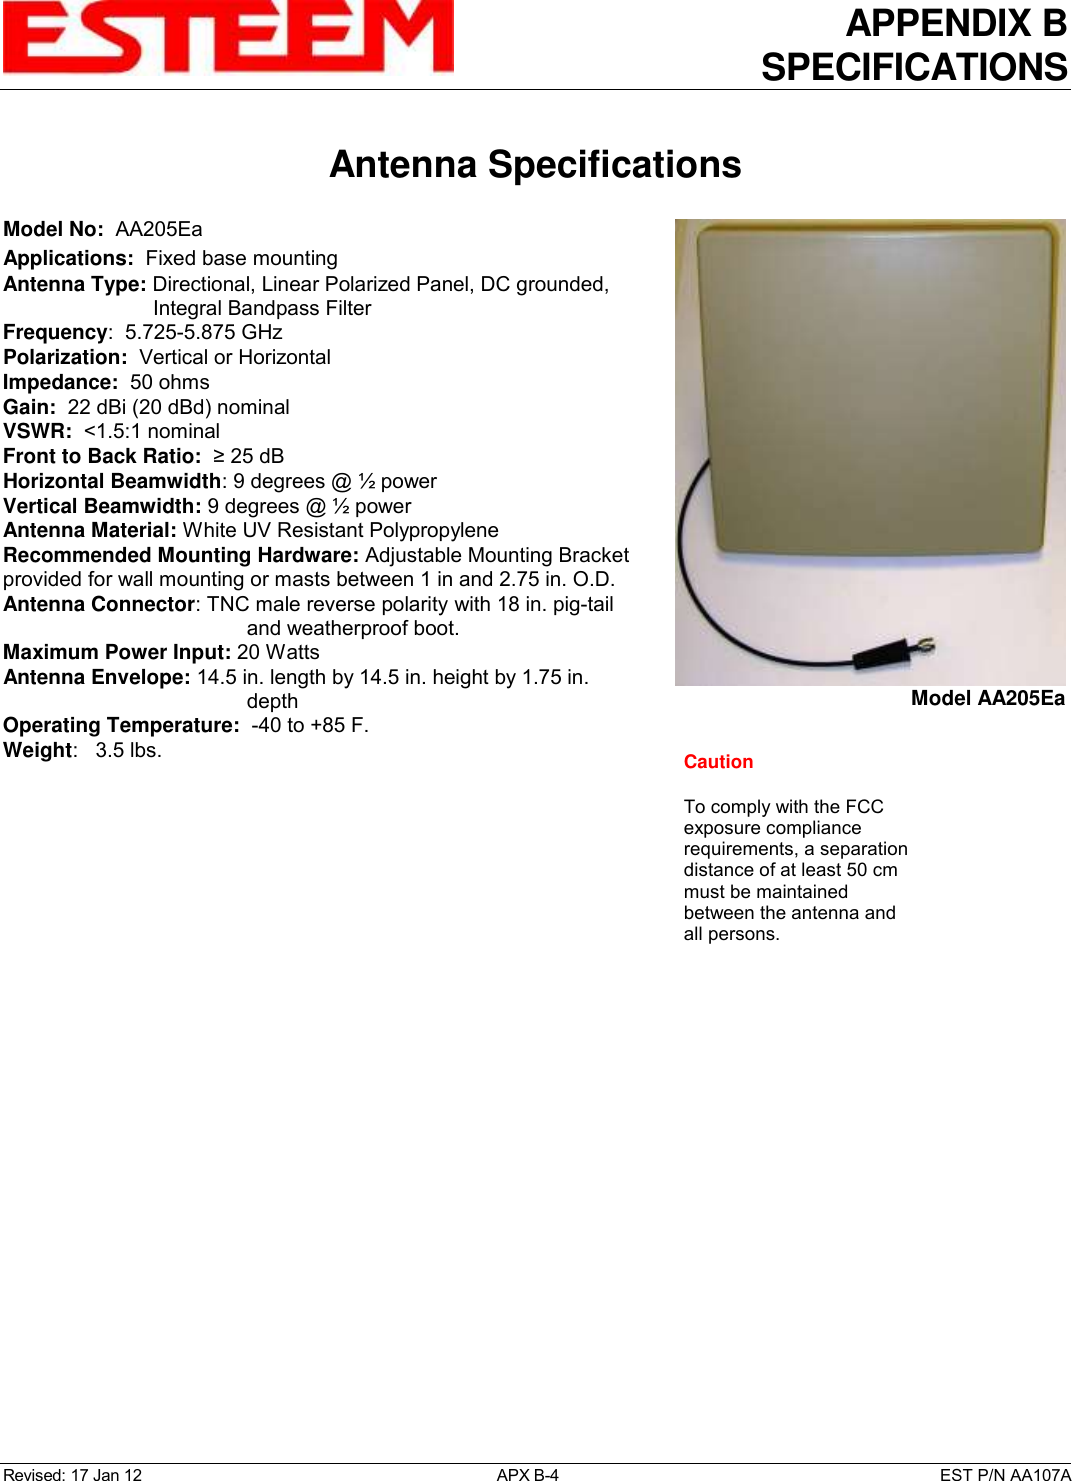 APPENDIX B SPECIFICATIONS   Antenna Specifications  Revised: 17 Jan 12  APX B-4  EST P/N AA107A Model No:  AA205Ea Applications:  Fixed base mounting  Antenna Type: Directional, Linear Polarized Panel, DC grounded, Integral Bandpass Filter Frequency:  5.725-5.875 GHz Polarization:  Vertical or Horizontal Impedance:  50 ohms Gain:  22 dBi (20 dBd) nominal VSWR:  &lt;1.5:1 nominal  Front to Back Ratio:  ≥ 25 dB Horizontal Beamwidth: 9 degrees @ ½ power Vertical Beamwidth: 9 degrees @ ½ power Antenna Material: White UV Resistant Polypropylene Recommended Mounting Hardware: Adjustable Mounting Bracket provided for wall mounting or masts between 1 in and 2.75 in. O.D. Antenna Connector: TNC male reverse polarity with 18 in. pig-tail and weatherproof boot. Maximum Power Input: 20 Watts Antenna Envelope: 14.5 in. length by 14.5 in. height by 1.75 in. depth Operating Temperature:  -40 to +85 F. Weight:   3.5 lbs.         Model AA205Ea Caution  To comply with the FCC exposure compliance requirements, a separation distance of at least 50 cm must be maintained between the antenna and all persons.  